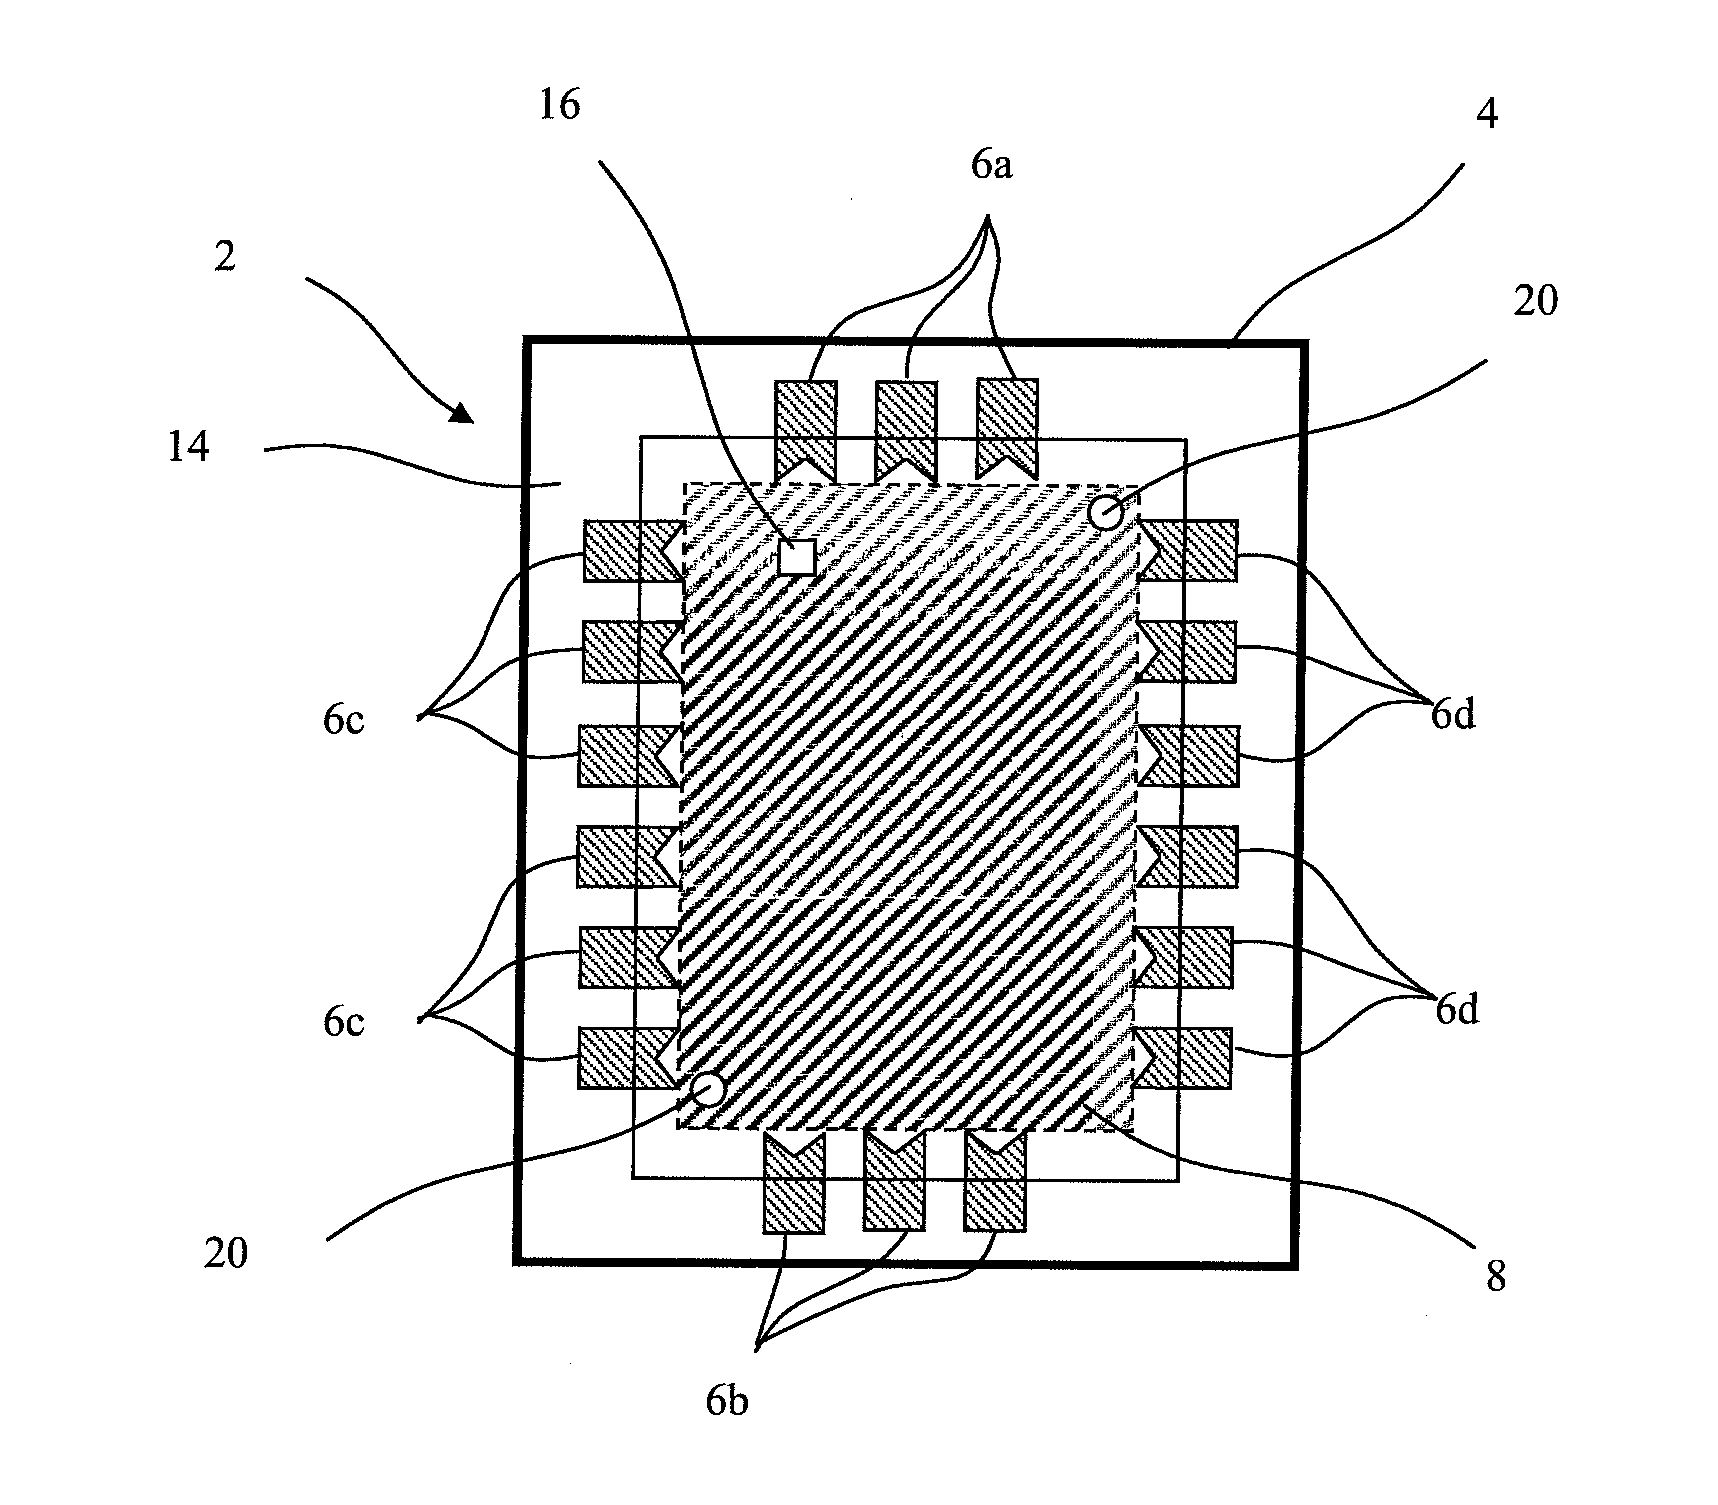 Two-dimensional gel electrophoresis apparatus and method